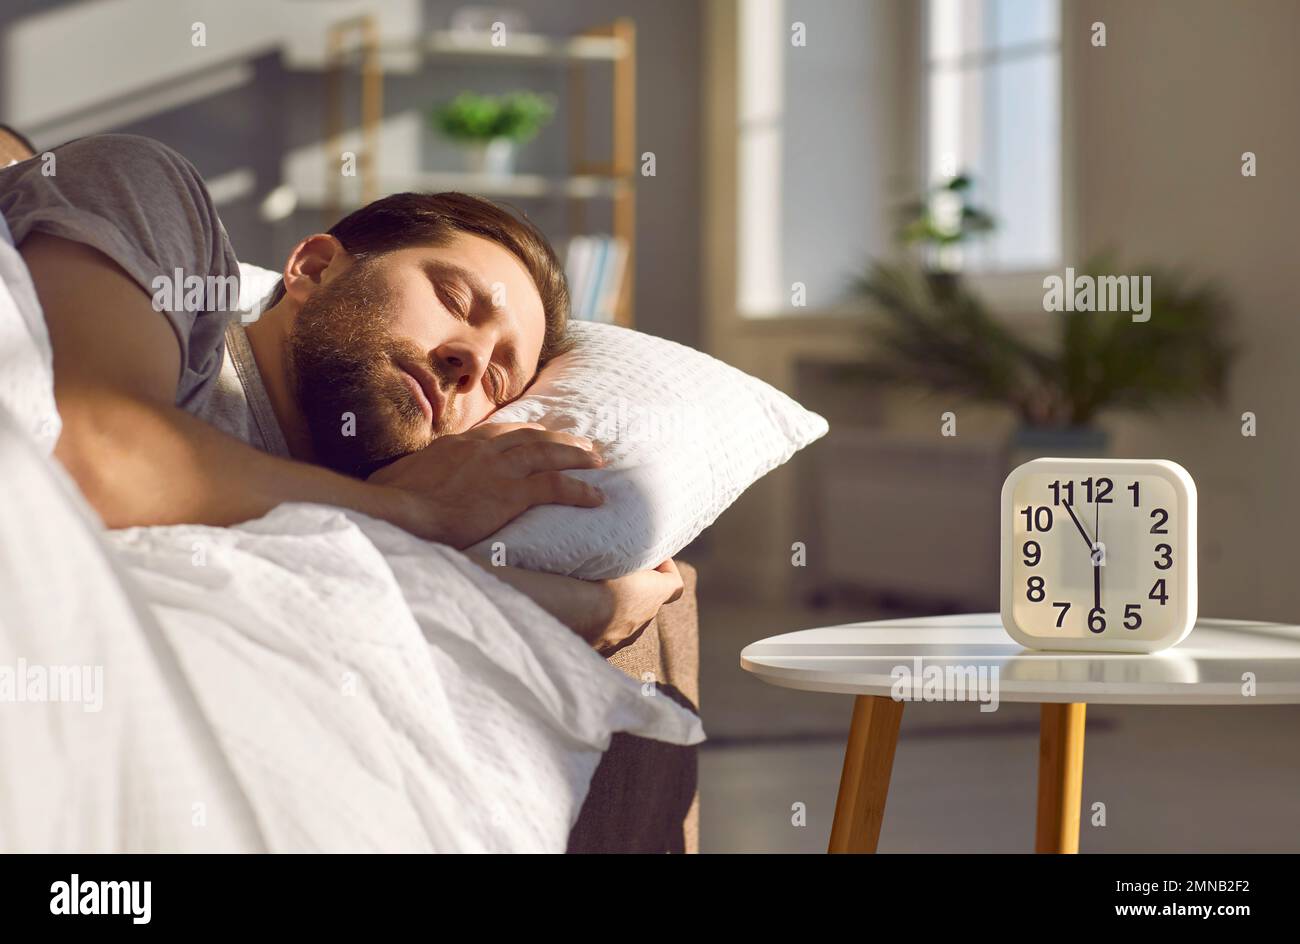 Handsome man sleeping on bed in his bedroom with alarm clock on his bedside table. Stock Photo